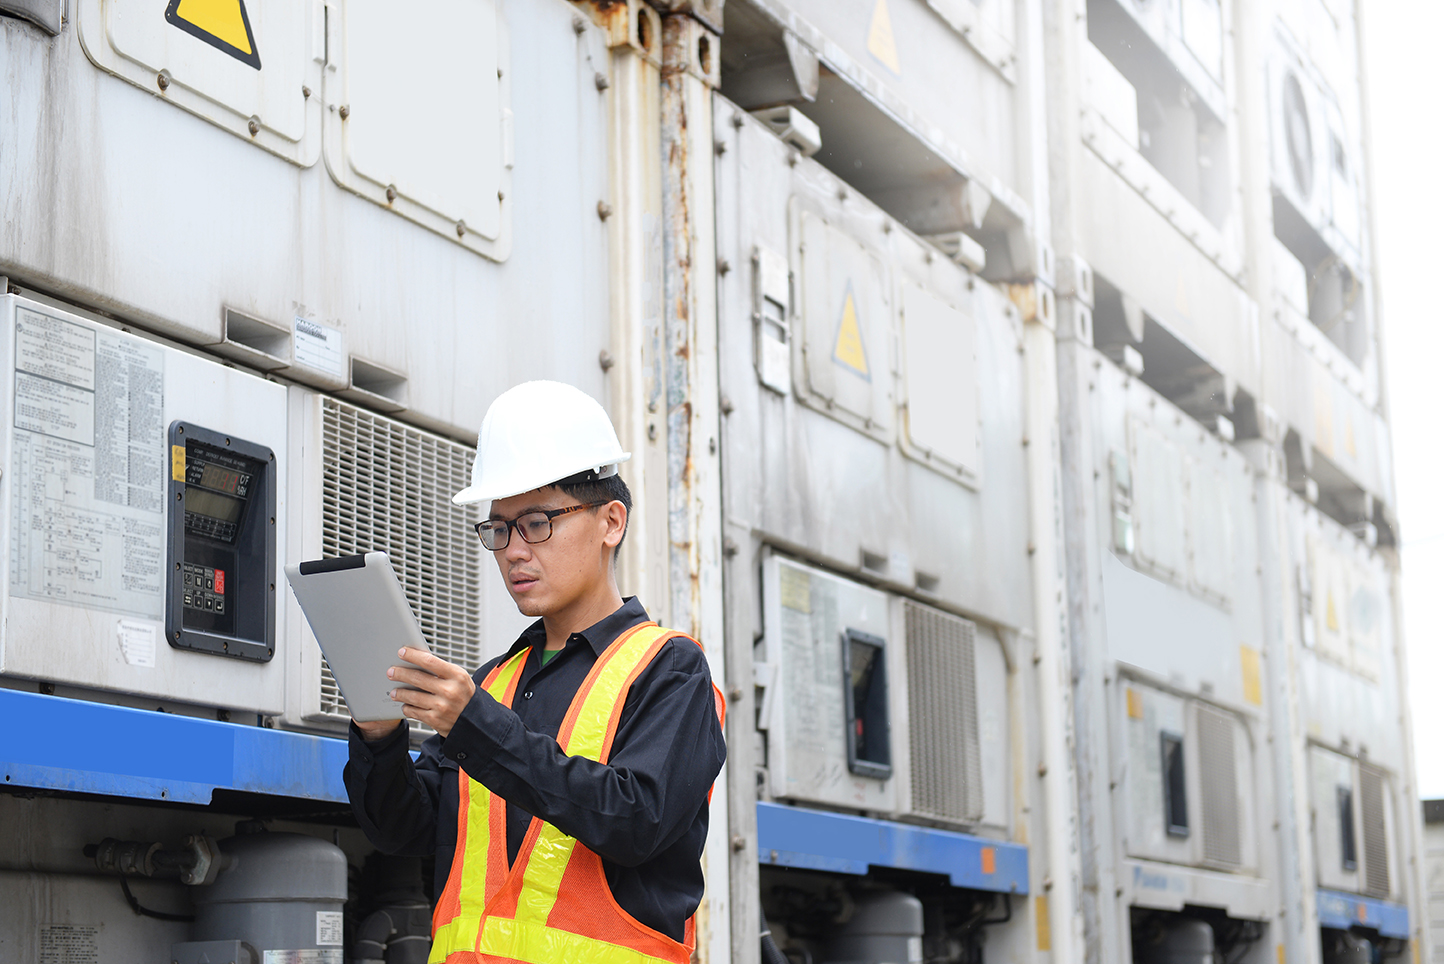 Reefer container technician is using tablet for monitoring temperature-controlled cold shipments